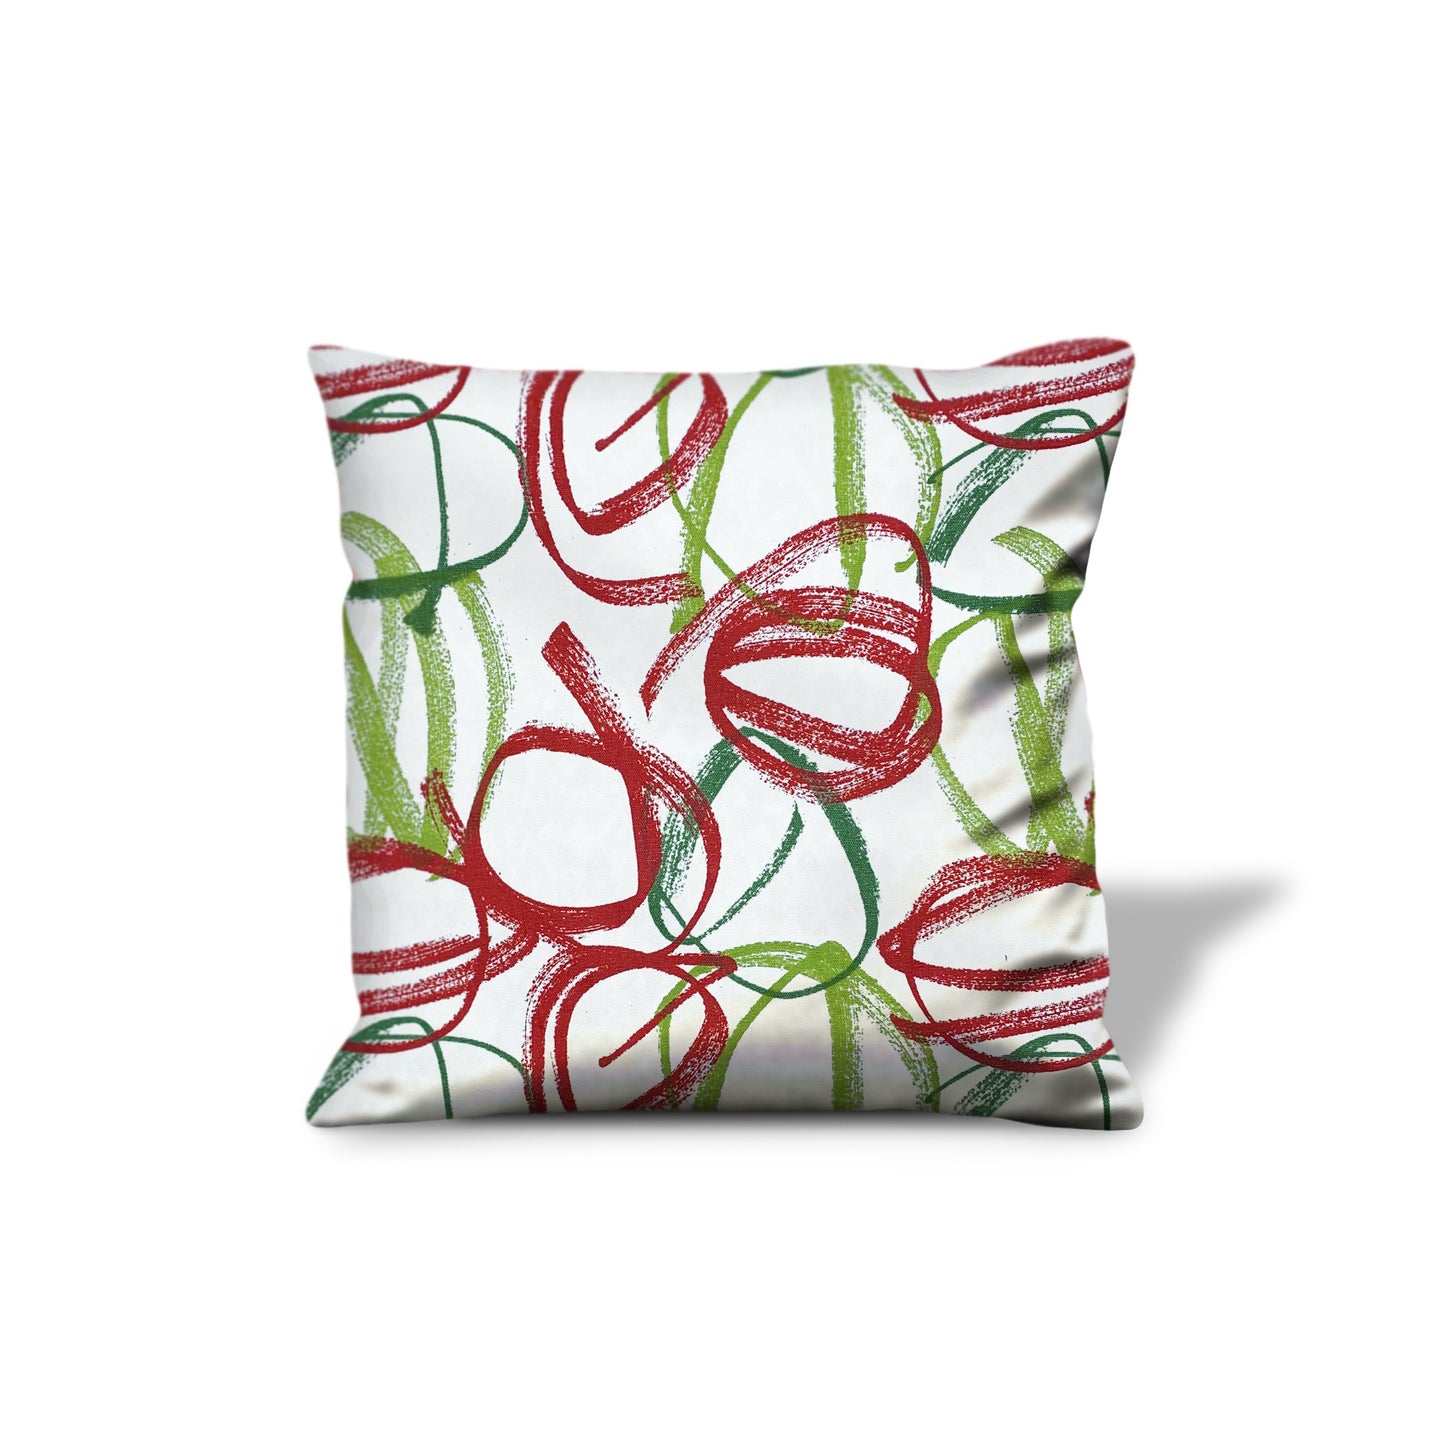 20" X 20" Red Gray And White Zippered 100% Cotton Abstract Throw Pillow Cover